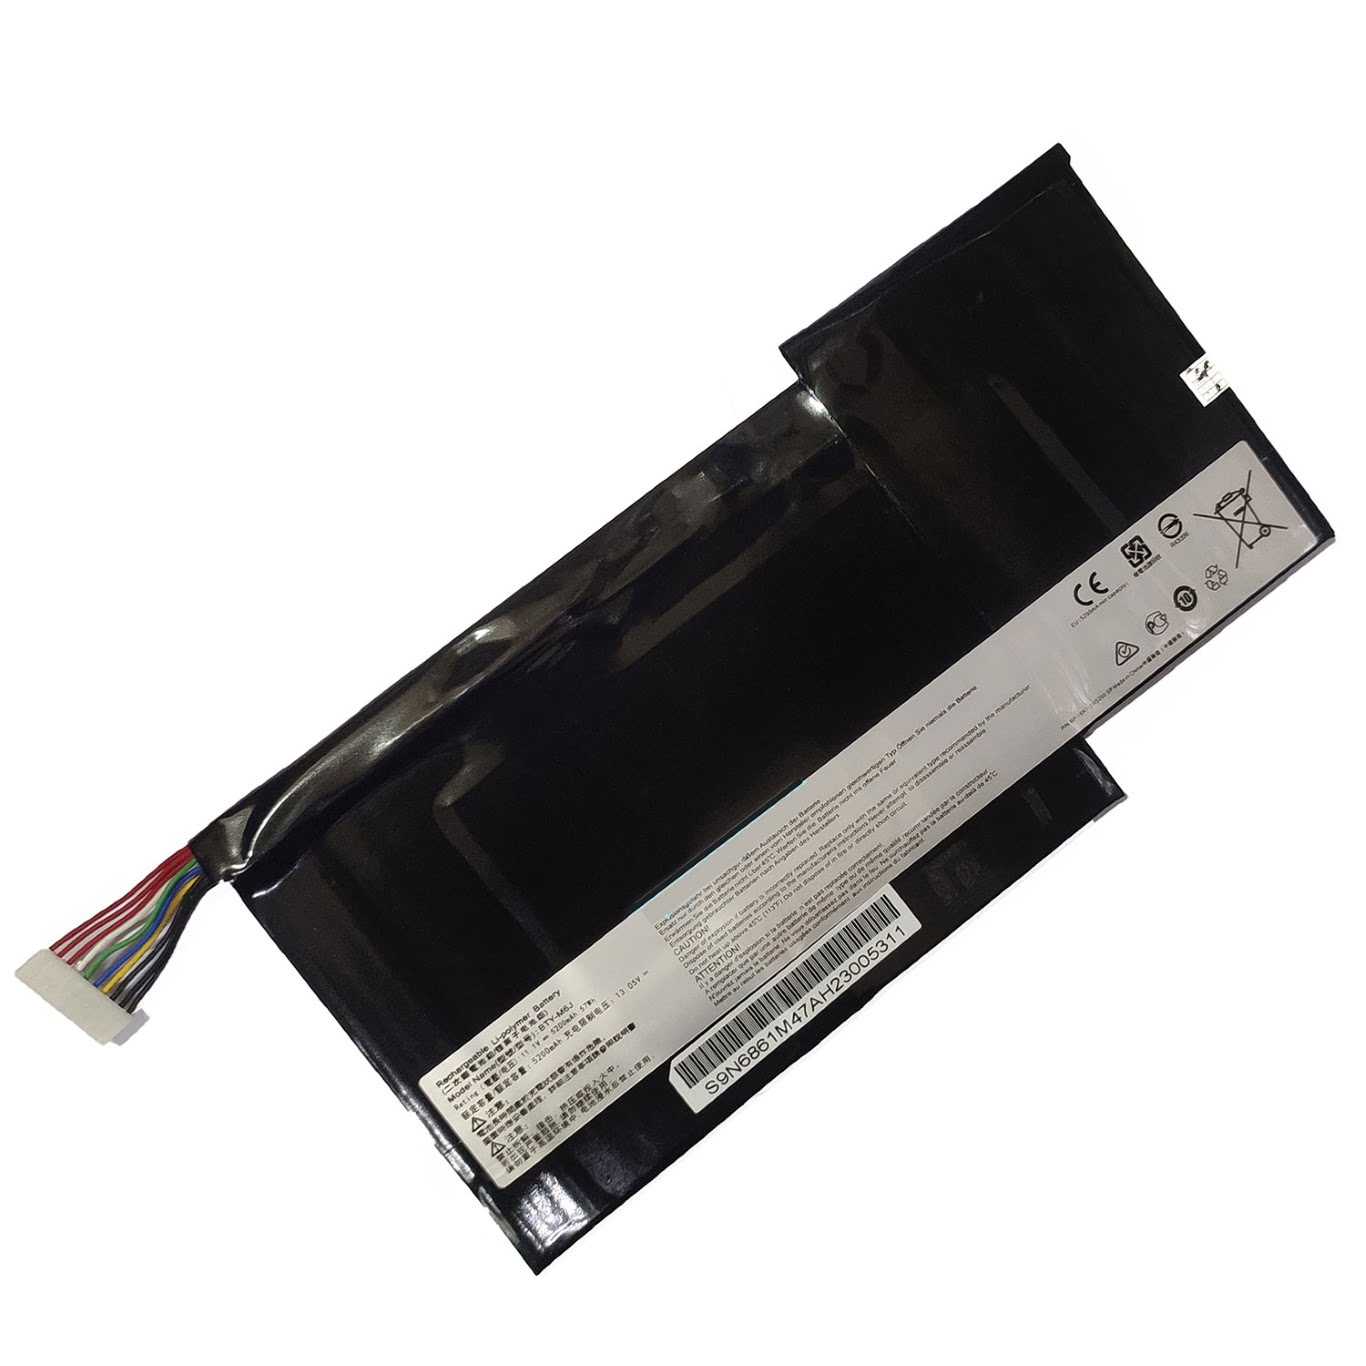 BTY-M6J, BTY-U6J replacement Laptop Battery for MSI GS63 7RE-009CN, GS63 7RE-018CN, 3 cells, 11.1V, 5200mah / 57wh